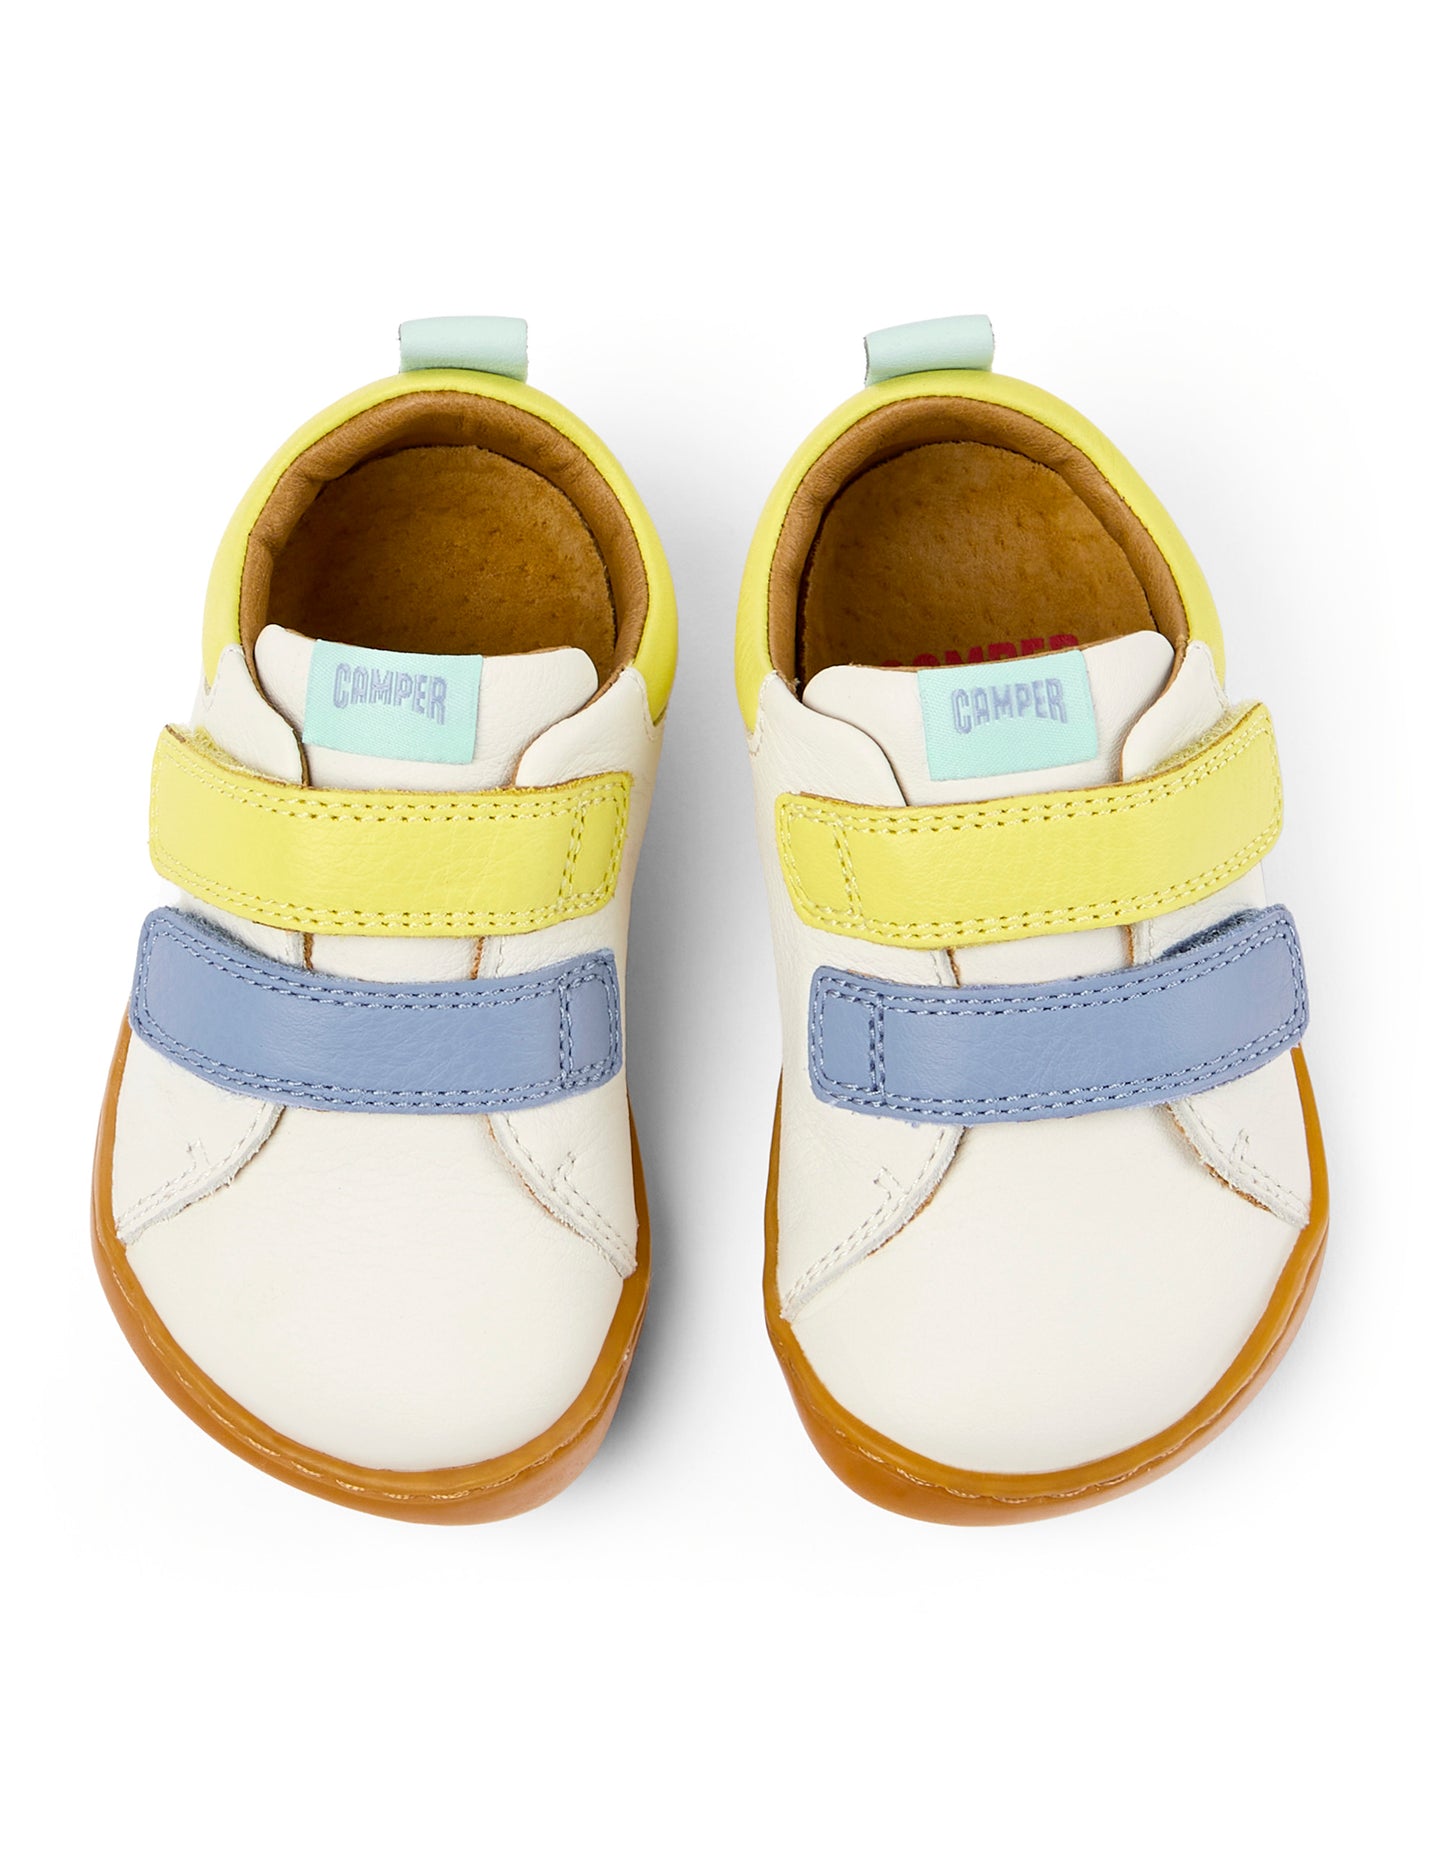 A unisex shoe by Camper, style Peu, in white with blue and yellow velcro straps. Above view of a pair.